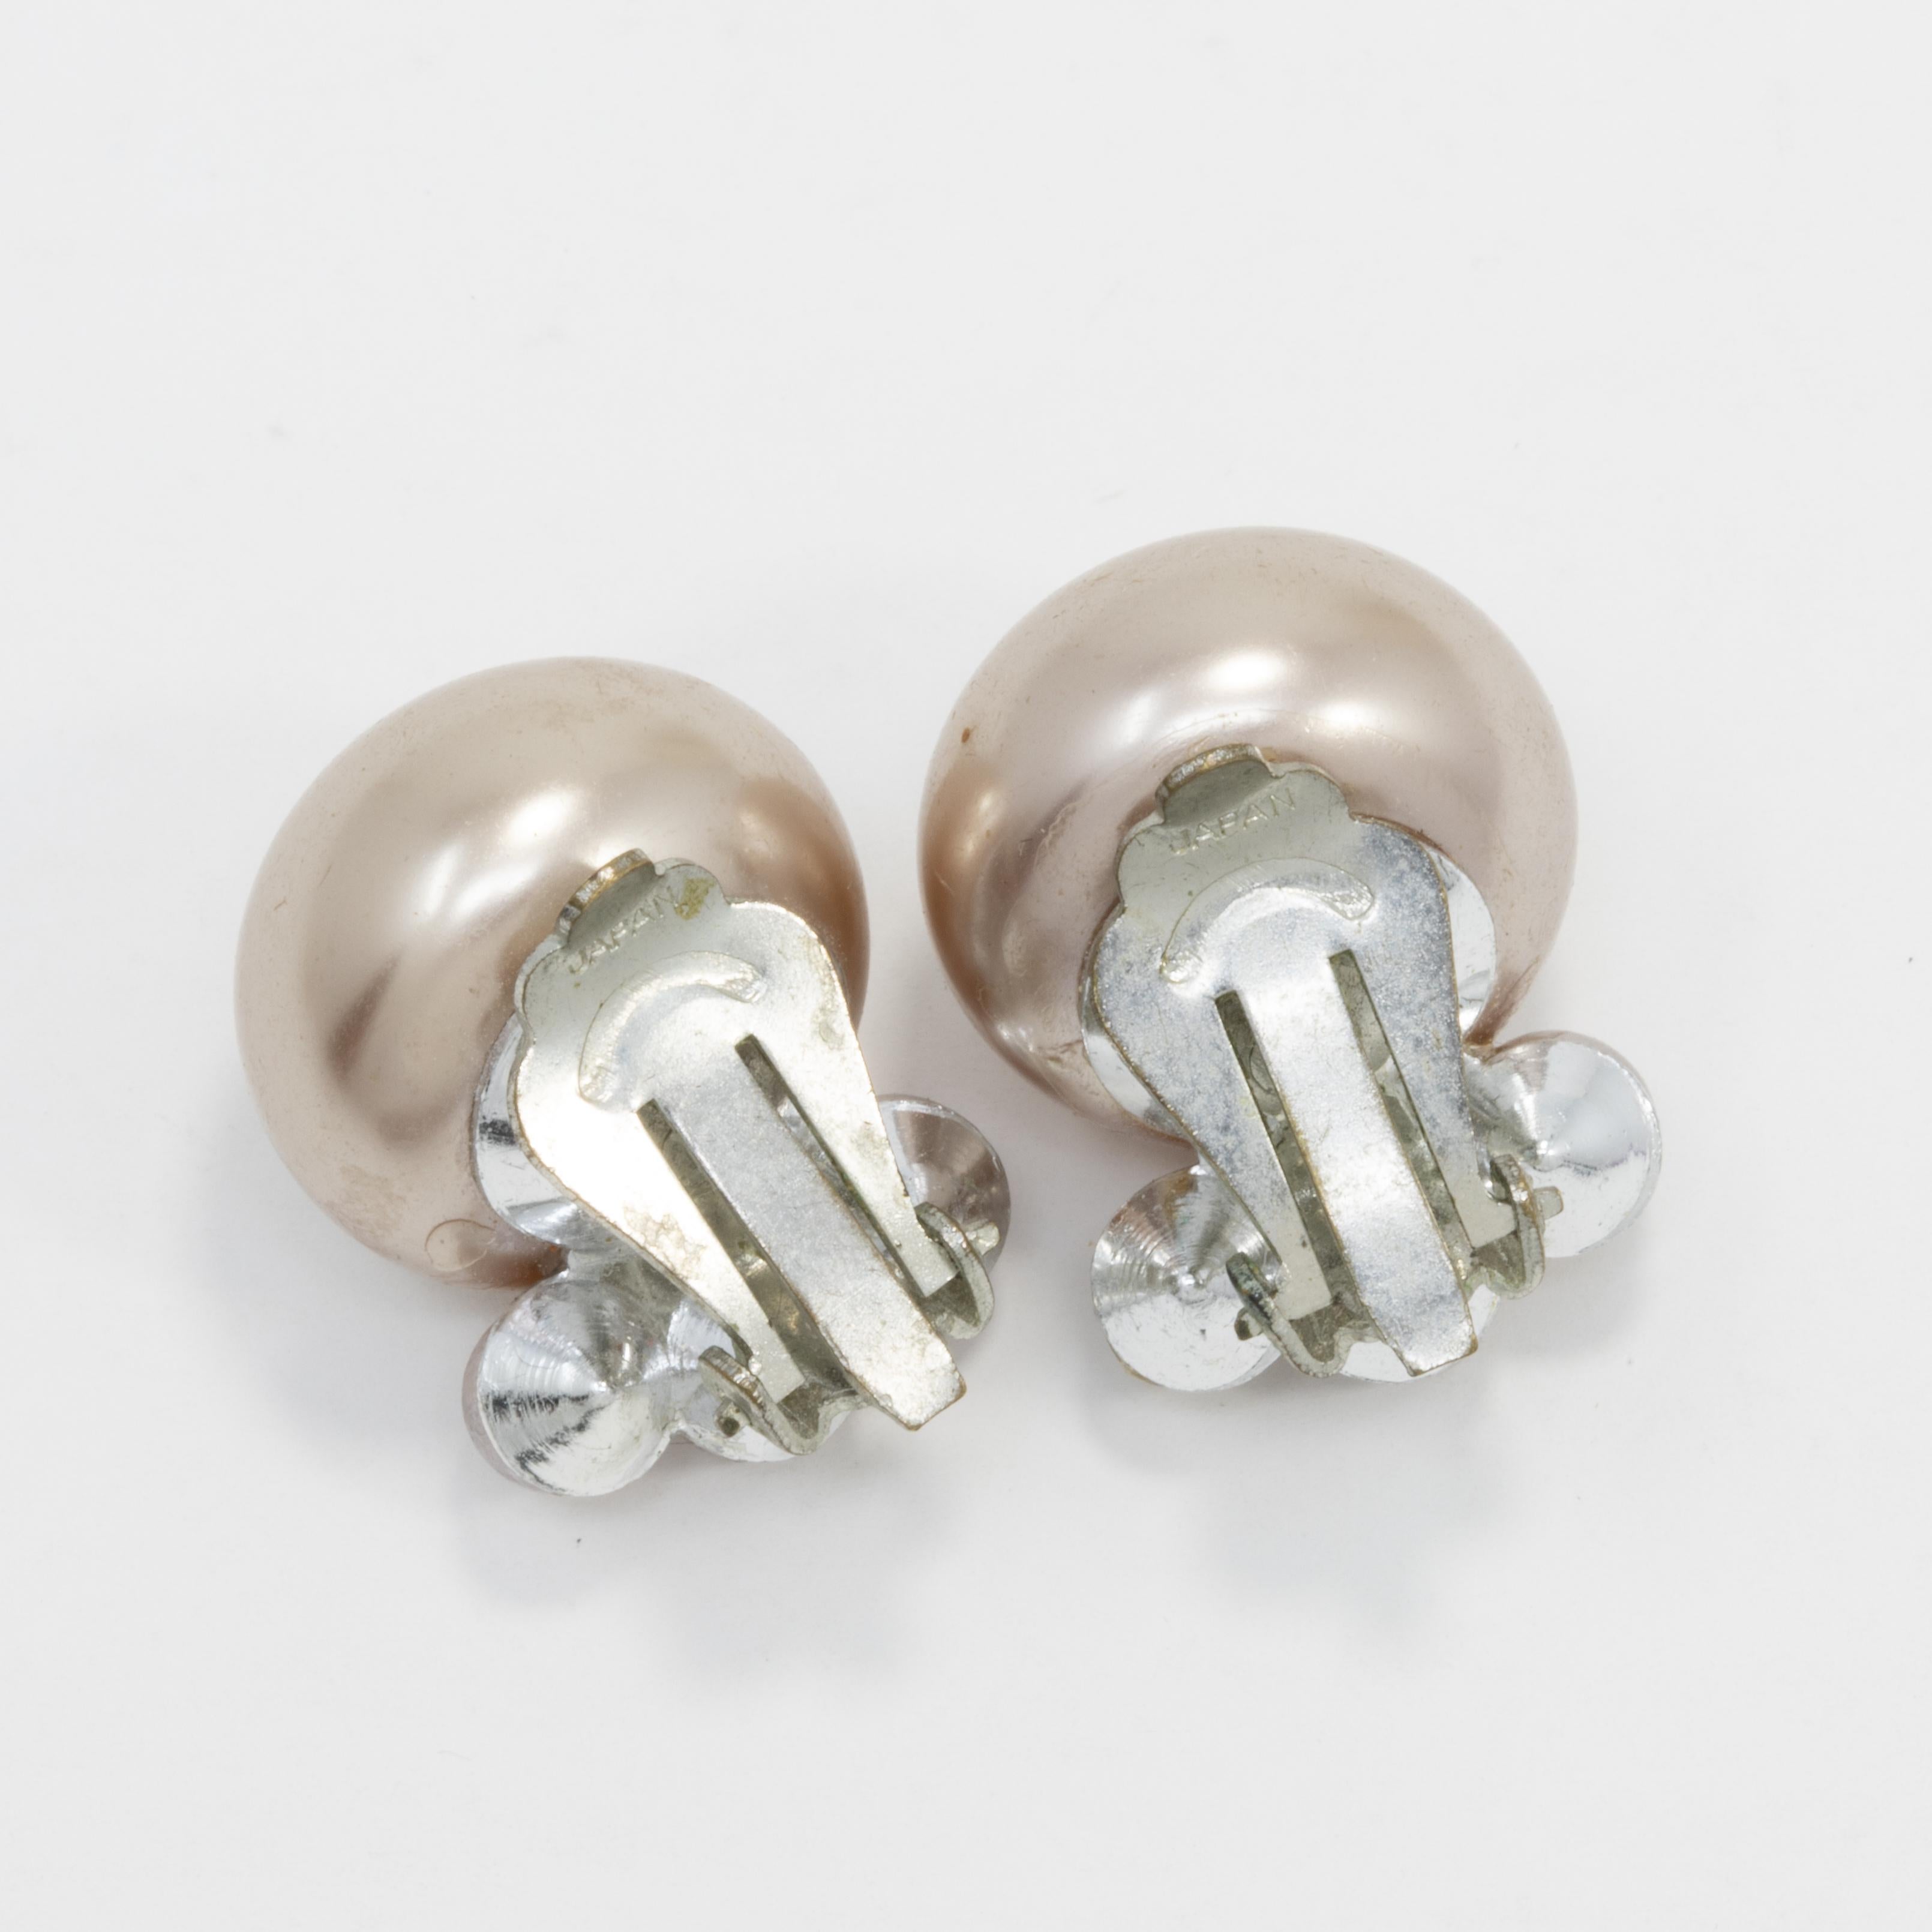 A pair of stylish retro clip on earrings, each featuring a cluster of lilac-tone faux pearls set on silvertone clips.
